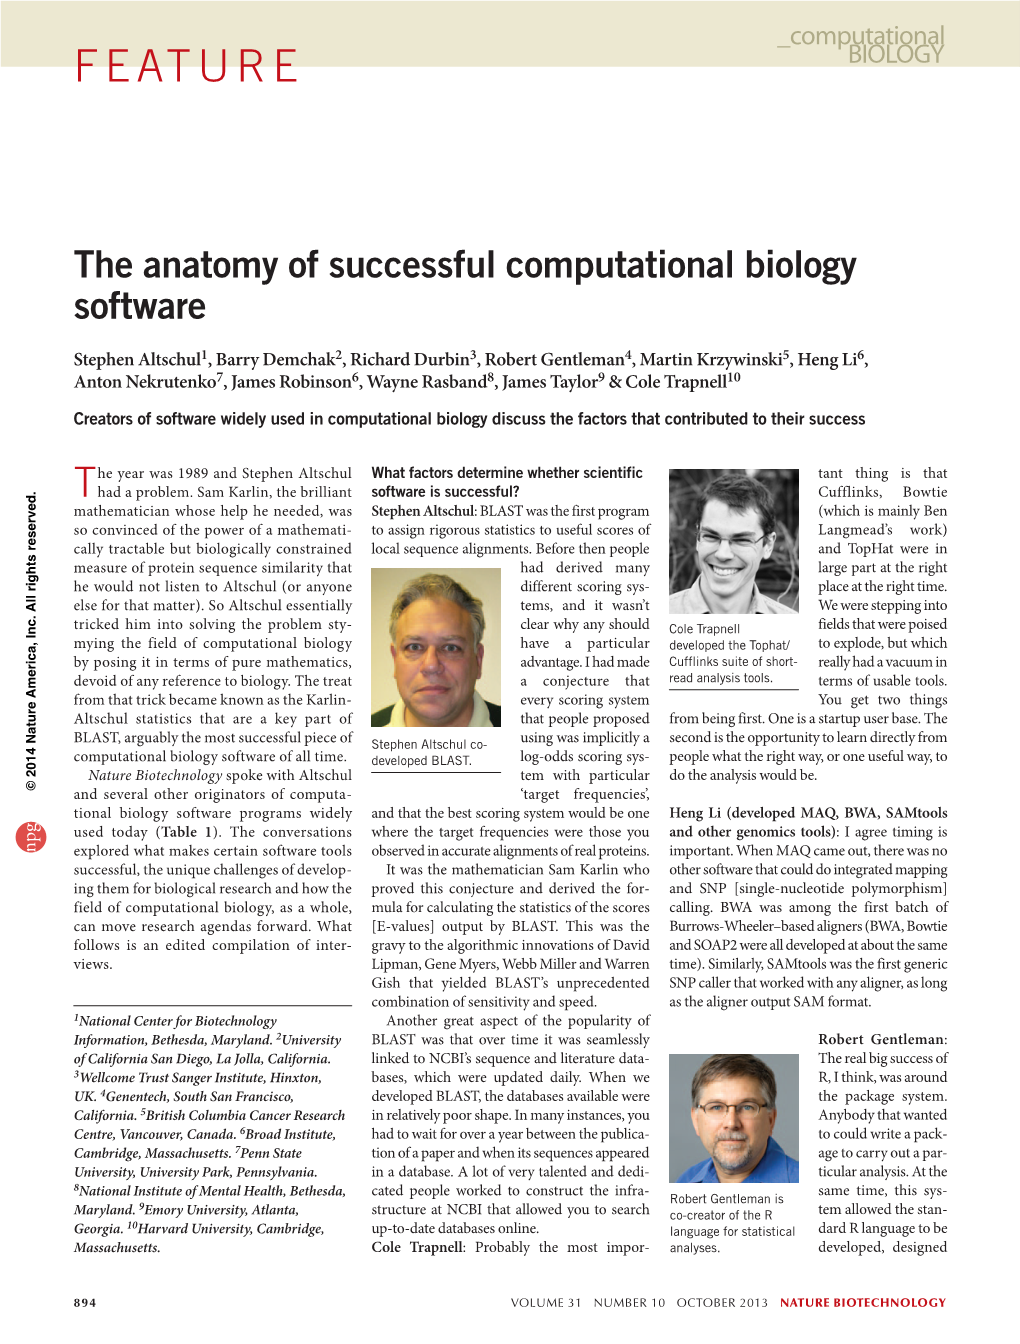 The Anatomy of Successful Computational Biology Software